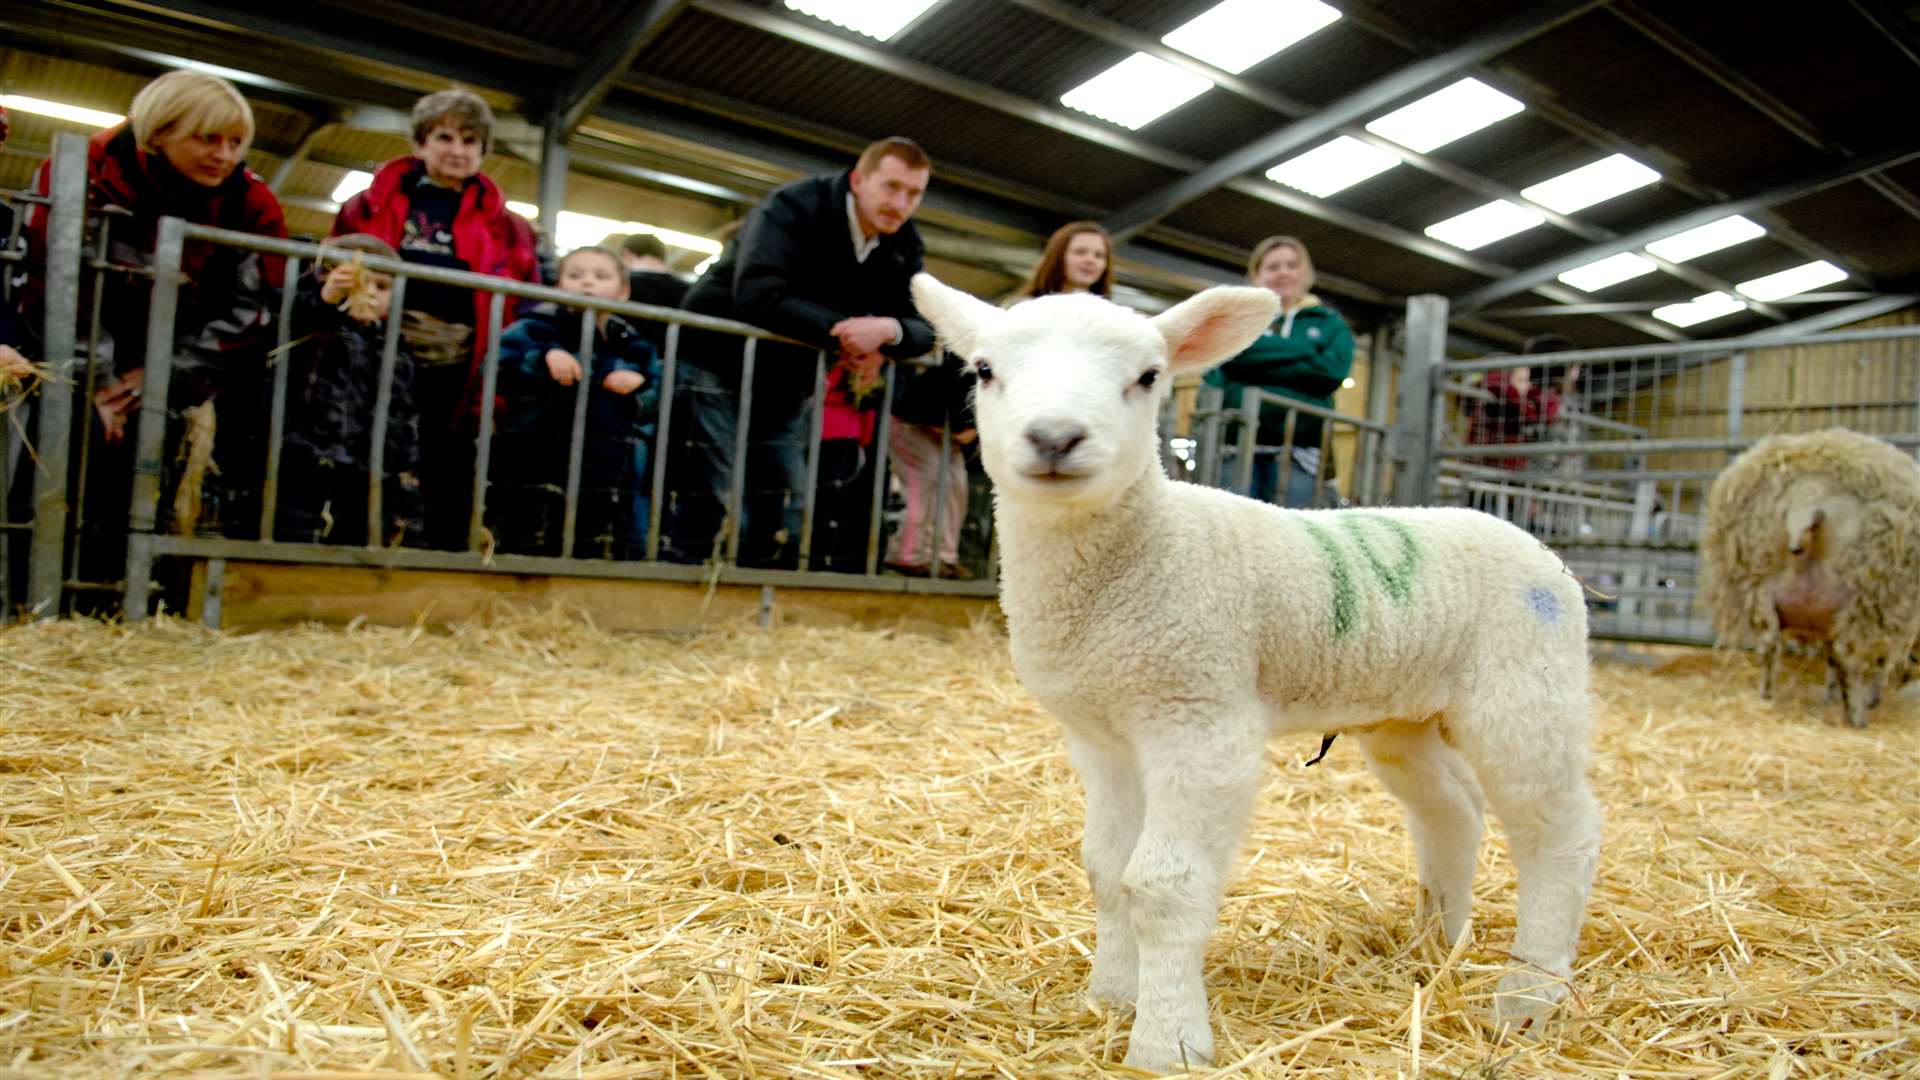 Lambing events in Kent are gearing up to welcome new arrivals and visitors!